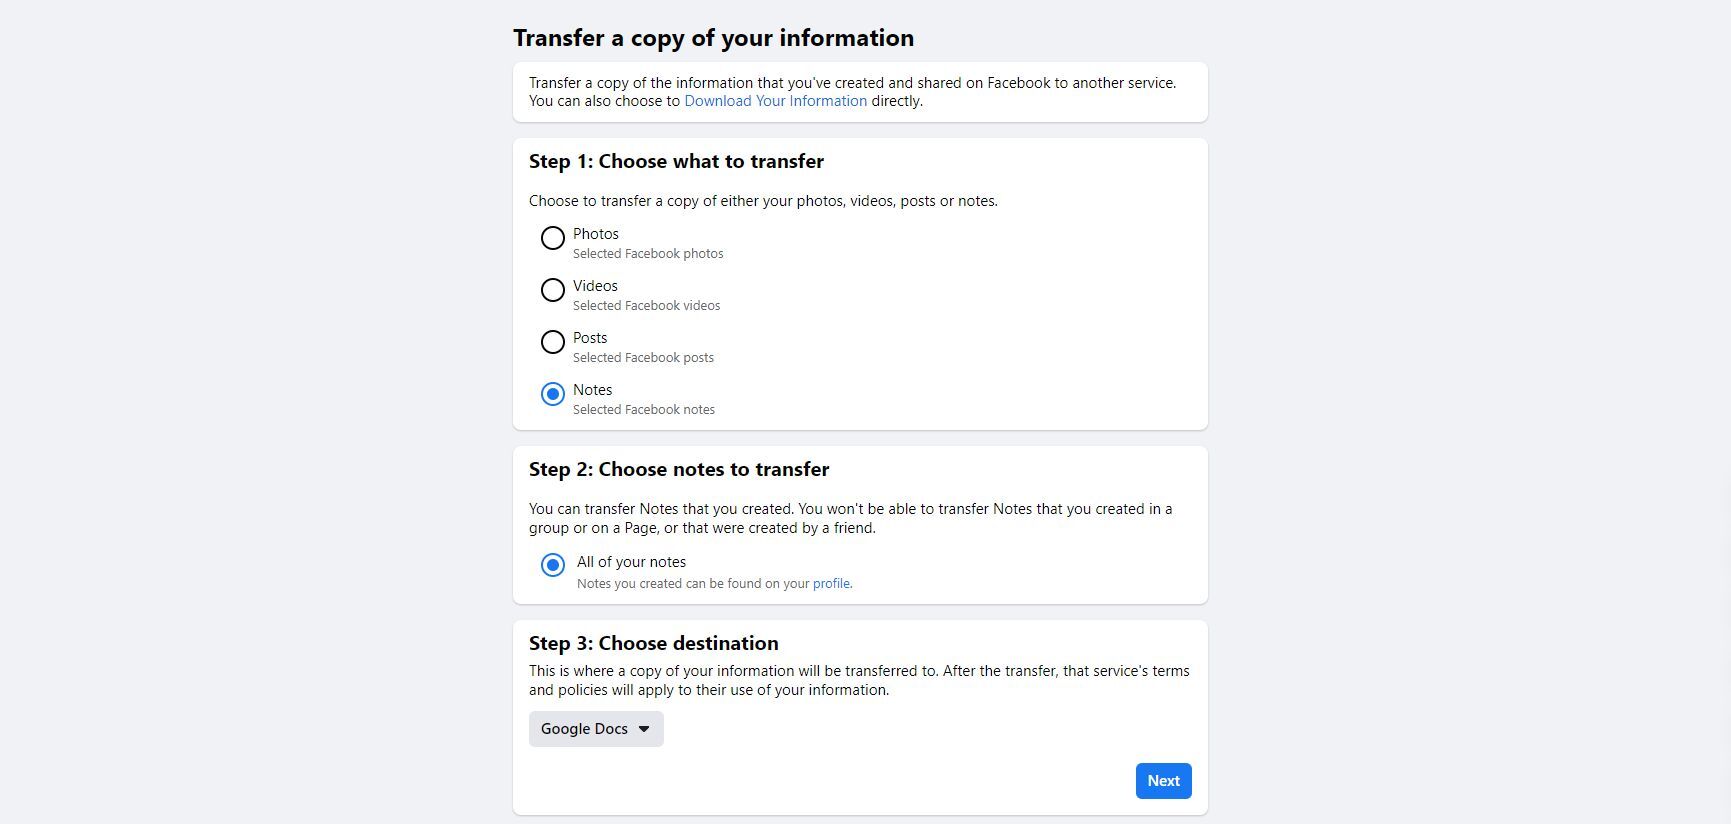 How to transfer your Facebook Posts and Notes in five simple steps